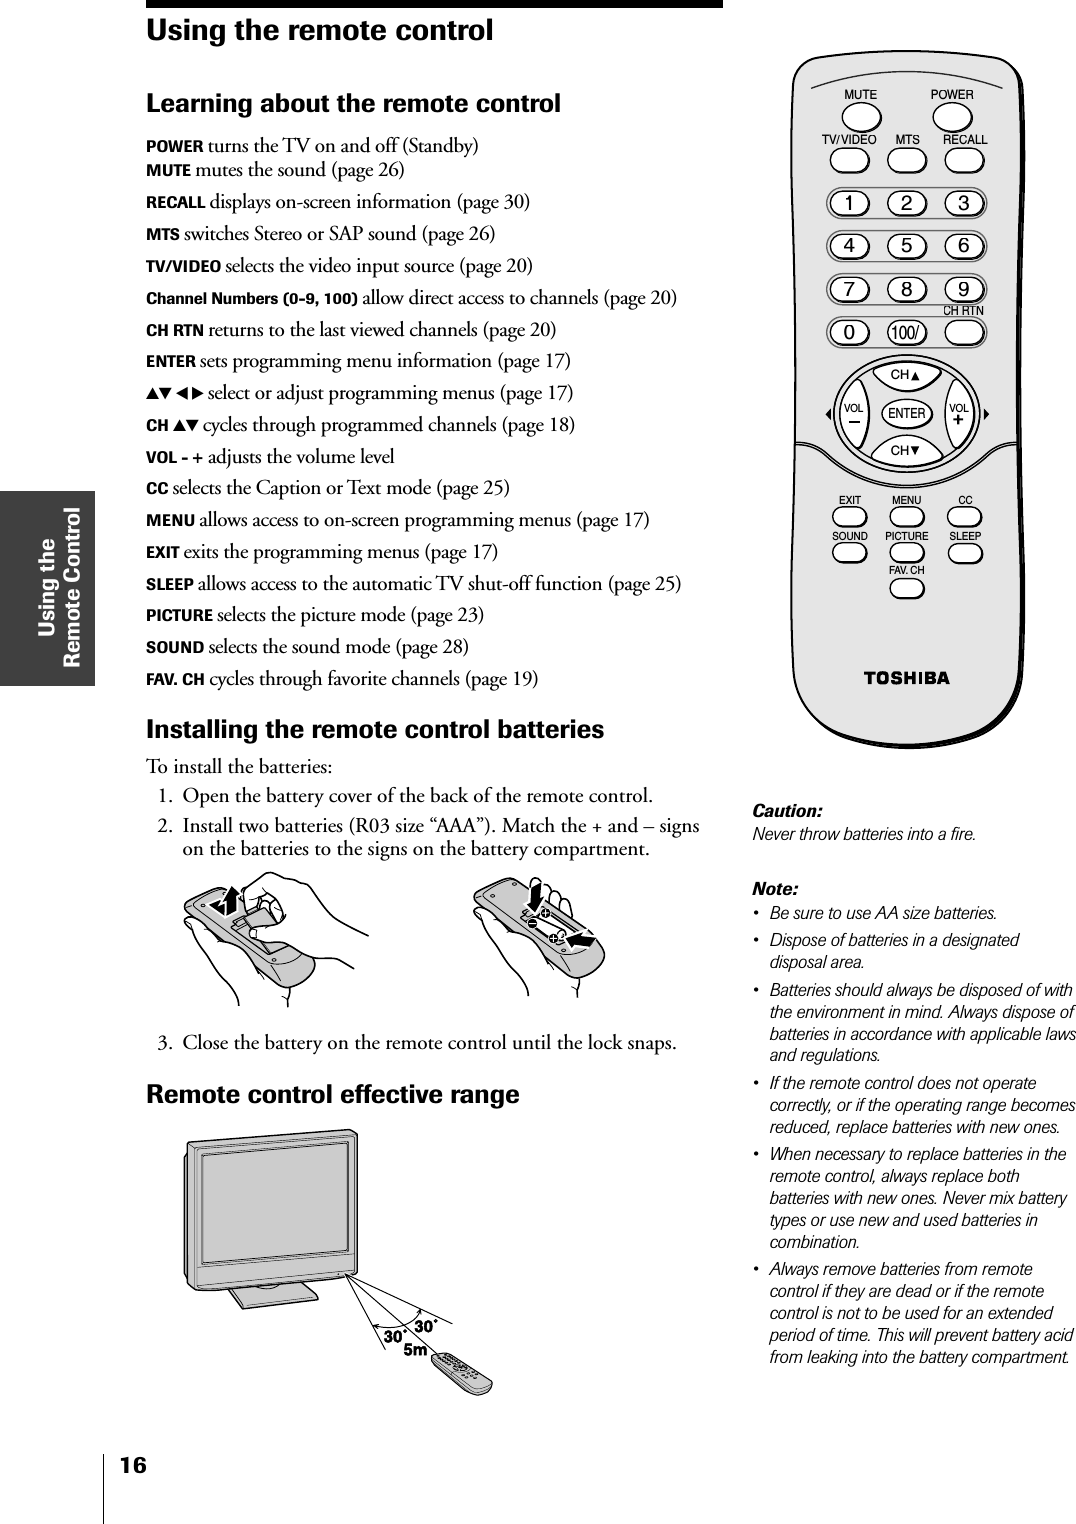 Using theRemote Control16Using the remote controlLearning about the remote controlPOWER turns the TV on and off (Standby)MUTE mutes the sound (page 26)RECALL displays on-screen information (page 30)MTS switches Stereo or SAP sound (page 26)TV/VIDEO selects the video input source (page 20)Channel Numbers (0-9, 100) allow direct access to channels (page 20)CH RTN returns to the last viewed channels (page 20)ENTER sets programming menu information (page 17)yz x • select or adjust programming menus (page 17)CH yz cycles through programmed channels (page 18)VOL - + adjusts the volume levelCC selects the Caption or Text mode (page 25)MENU allows access to on-screen programming menus (page 17)EXIT exits the programming menus (page 17)SLEEP allows access to the automatic TV shut-off function (page 25)PICTURE selects the picture mode (page 23)SOUND selects the sound mode (page 28)FAV. CH cycles through favorite channels (page 19)Installing the remote control batteriesTo install the batteries:1. Open the battery cover of the back of the remote control.2. Install two batteries (R03 size “AAA”). Match the + and – signson the batteries to the signs on the battery compartment.3. Close the battery on the remote control until the lock snaps.Remote control effective rangeCHCHRECALLTV/VIDEOMUTEPOWERMTSCH RTNCENTERCCEXIT MENUSLEEPSOUND PICTUREFAV. CHVOL VOL21135468709100/Note:• Be sure to use AA size batteries.• Dispose of batteries in a designateddisposal area.• Batteries should always be disposed of withthe environment in mind. Always dispose ofbatteries in accordance with applicable lawsand regulations.• If the remote control does not operatecorrectly, or if the operating range becomesreduced, replace batteries with new ones.• When necessary to replace batteries in theremote control, always replace bothbatteries with new ones. Never mix batterytypes or use new and used batteries incombination.• Always remove batteries from remotecontrol if they are dead or if the remotecontrol is not to be used for an extendedperiod of time. This will prevent battery acidfrom leaking into the battery compartment.Caution:Never throw batteries into a fire.